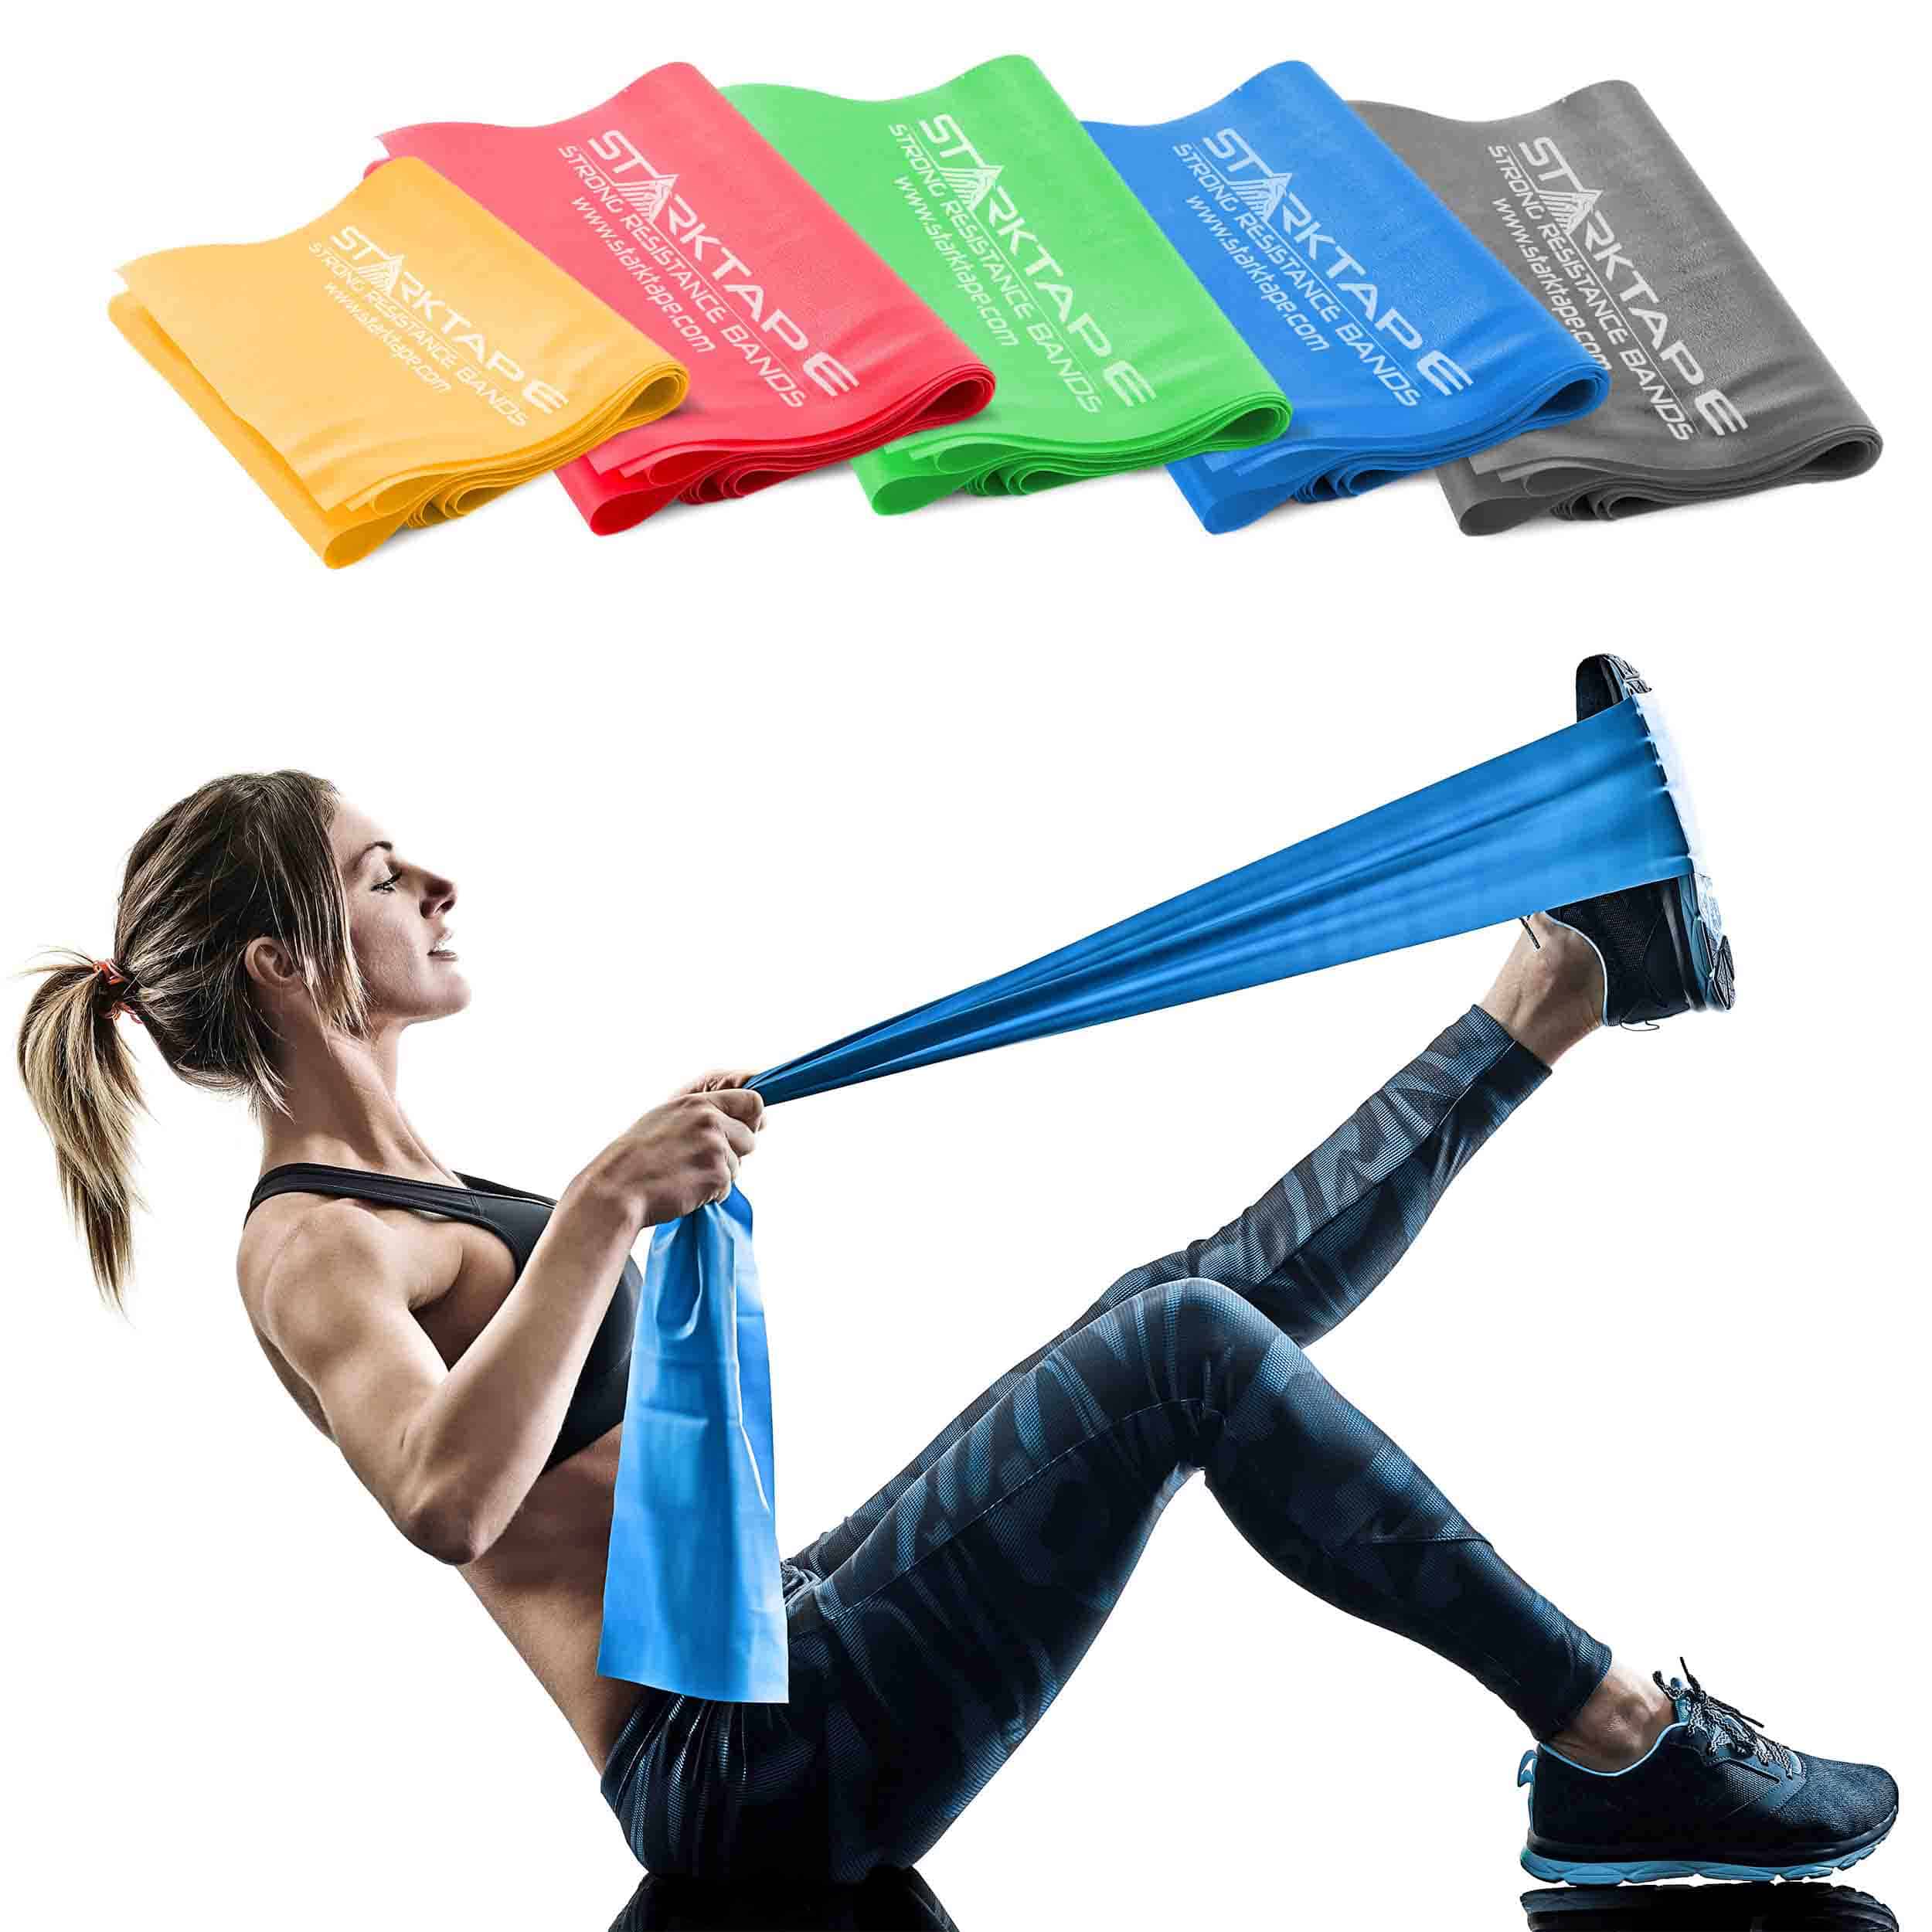 Exercise Workout Fitness Resitance Bands Set of 5 for Physical Resistance Bands 